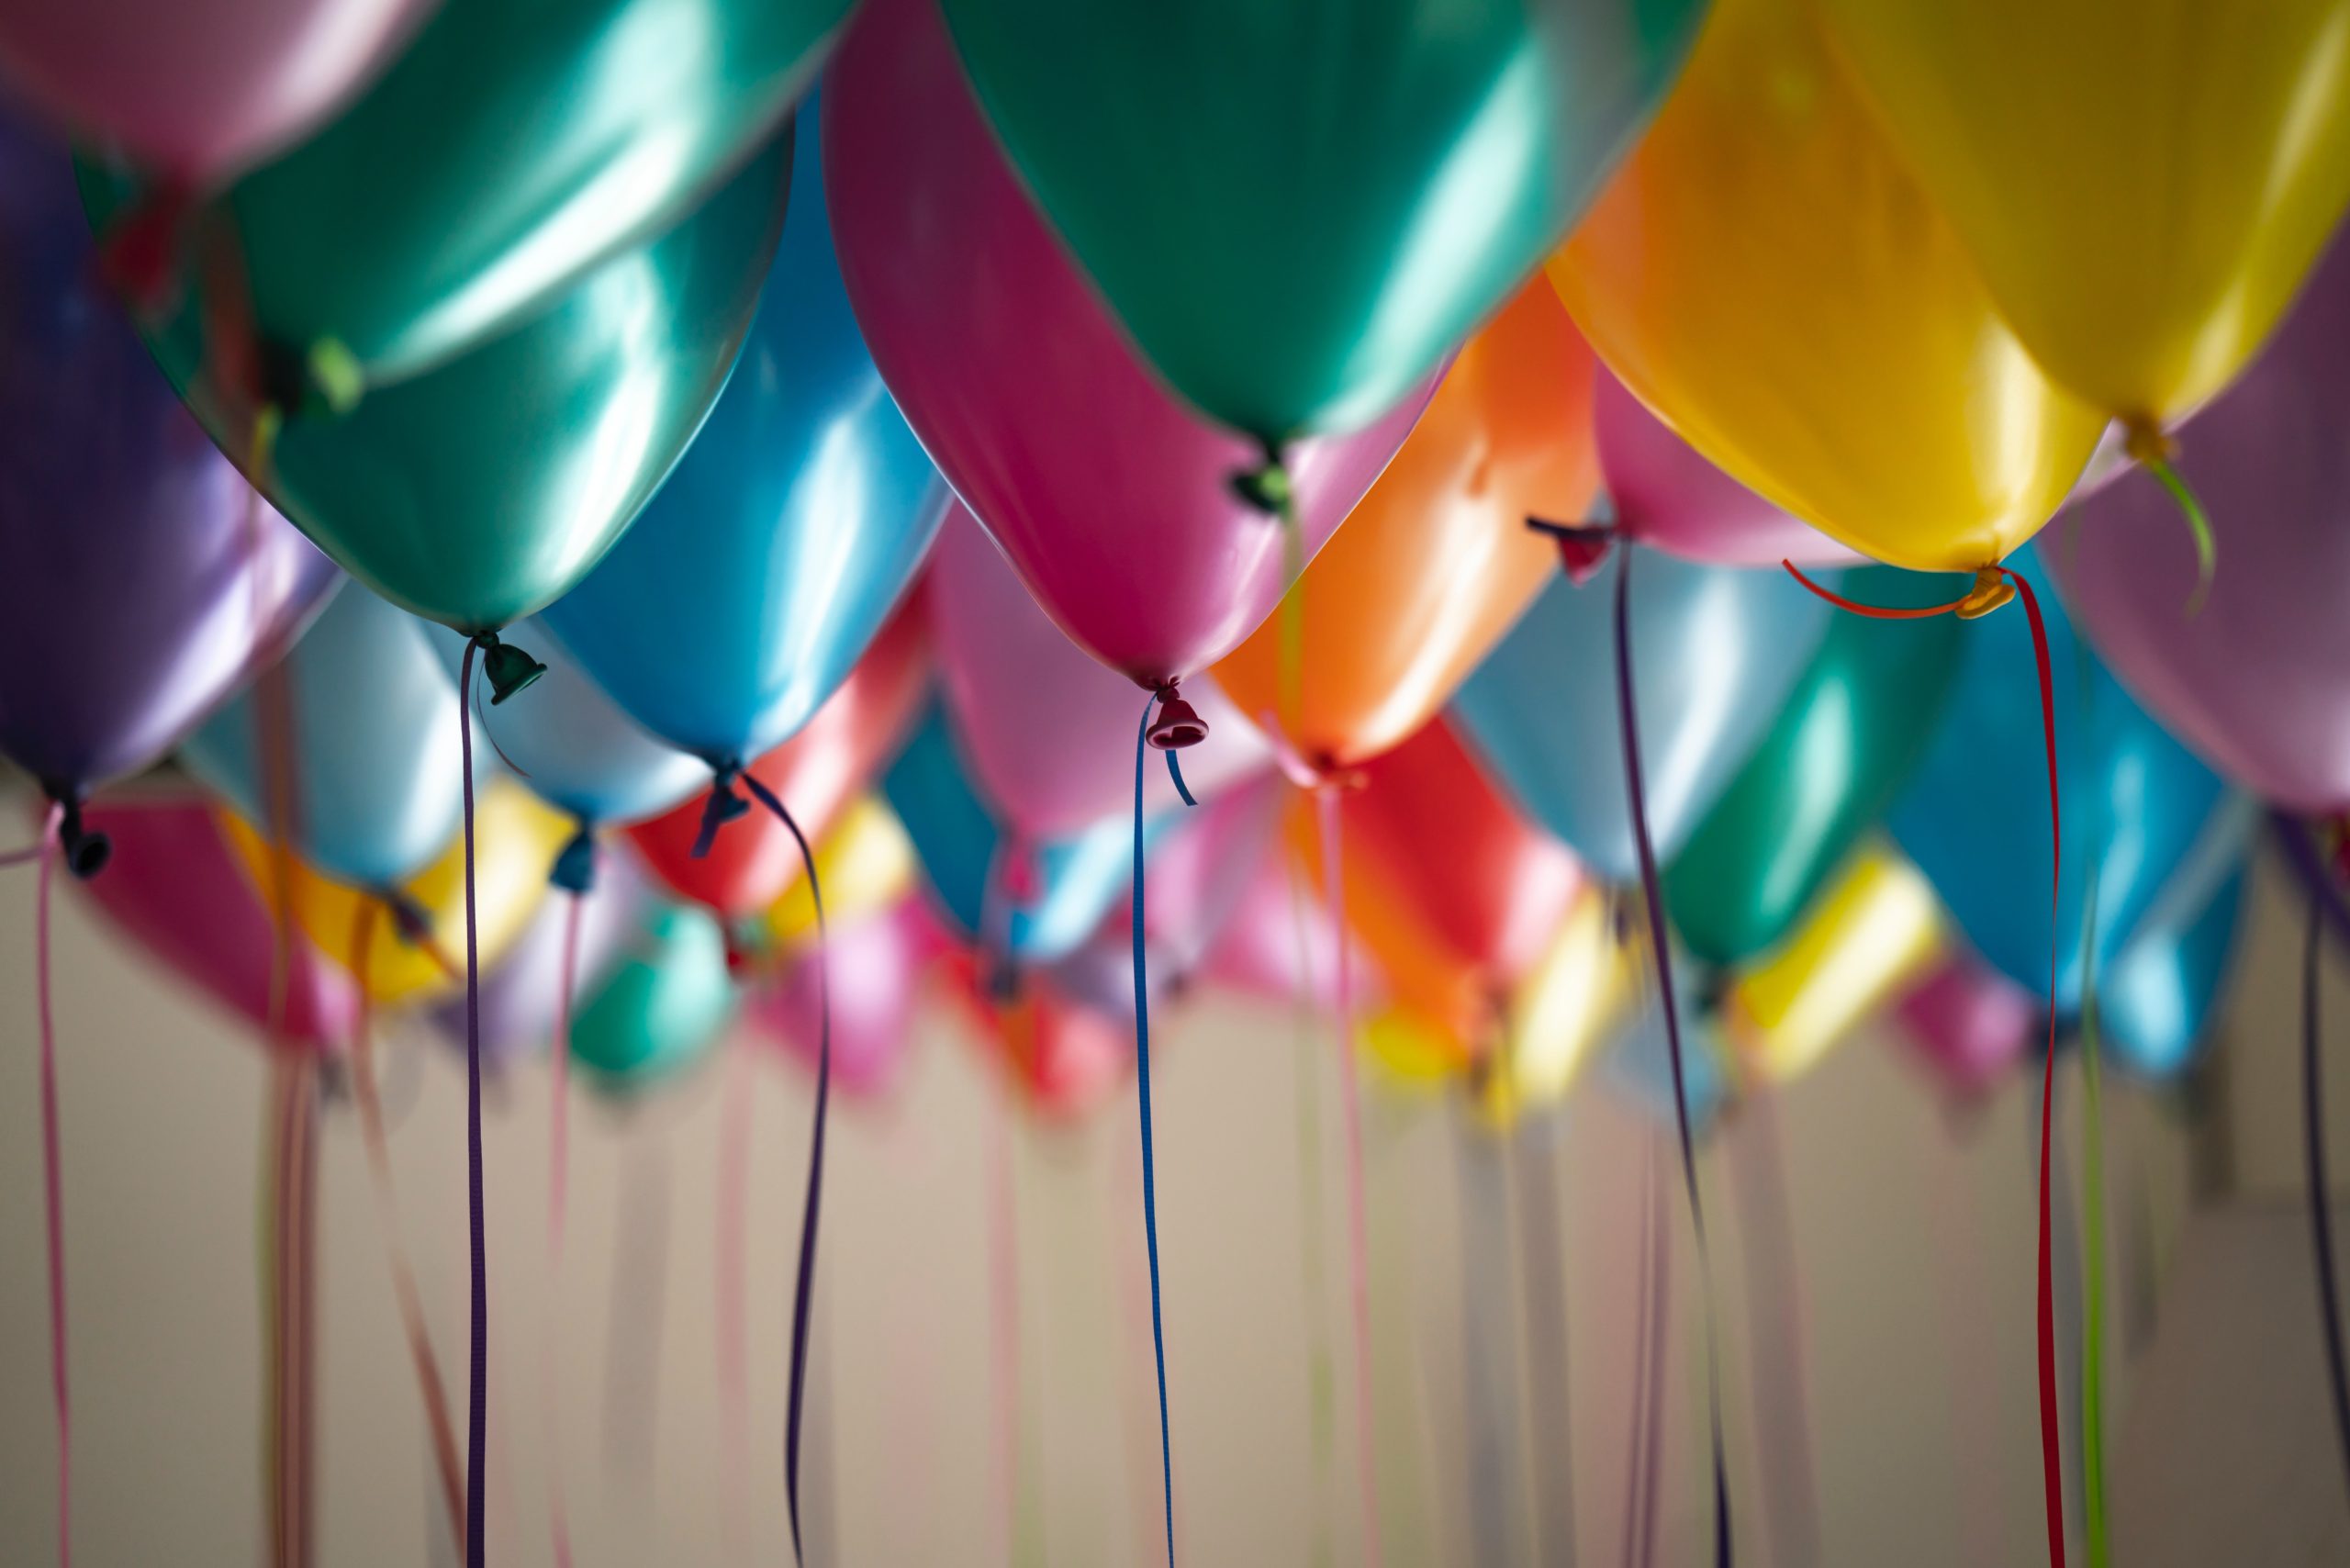 Image of many brightly coloured balloons